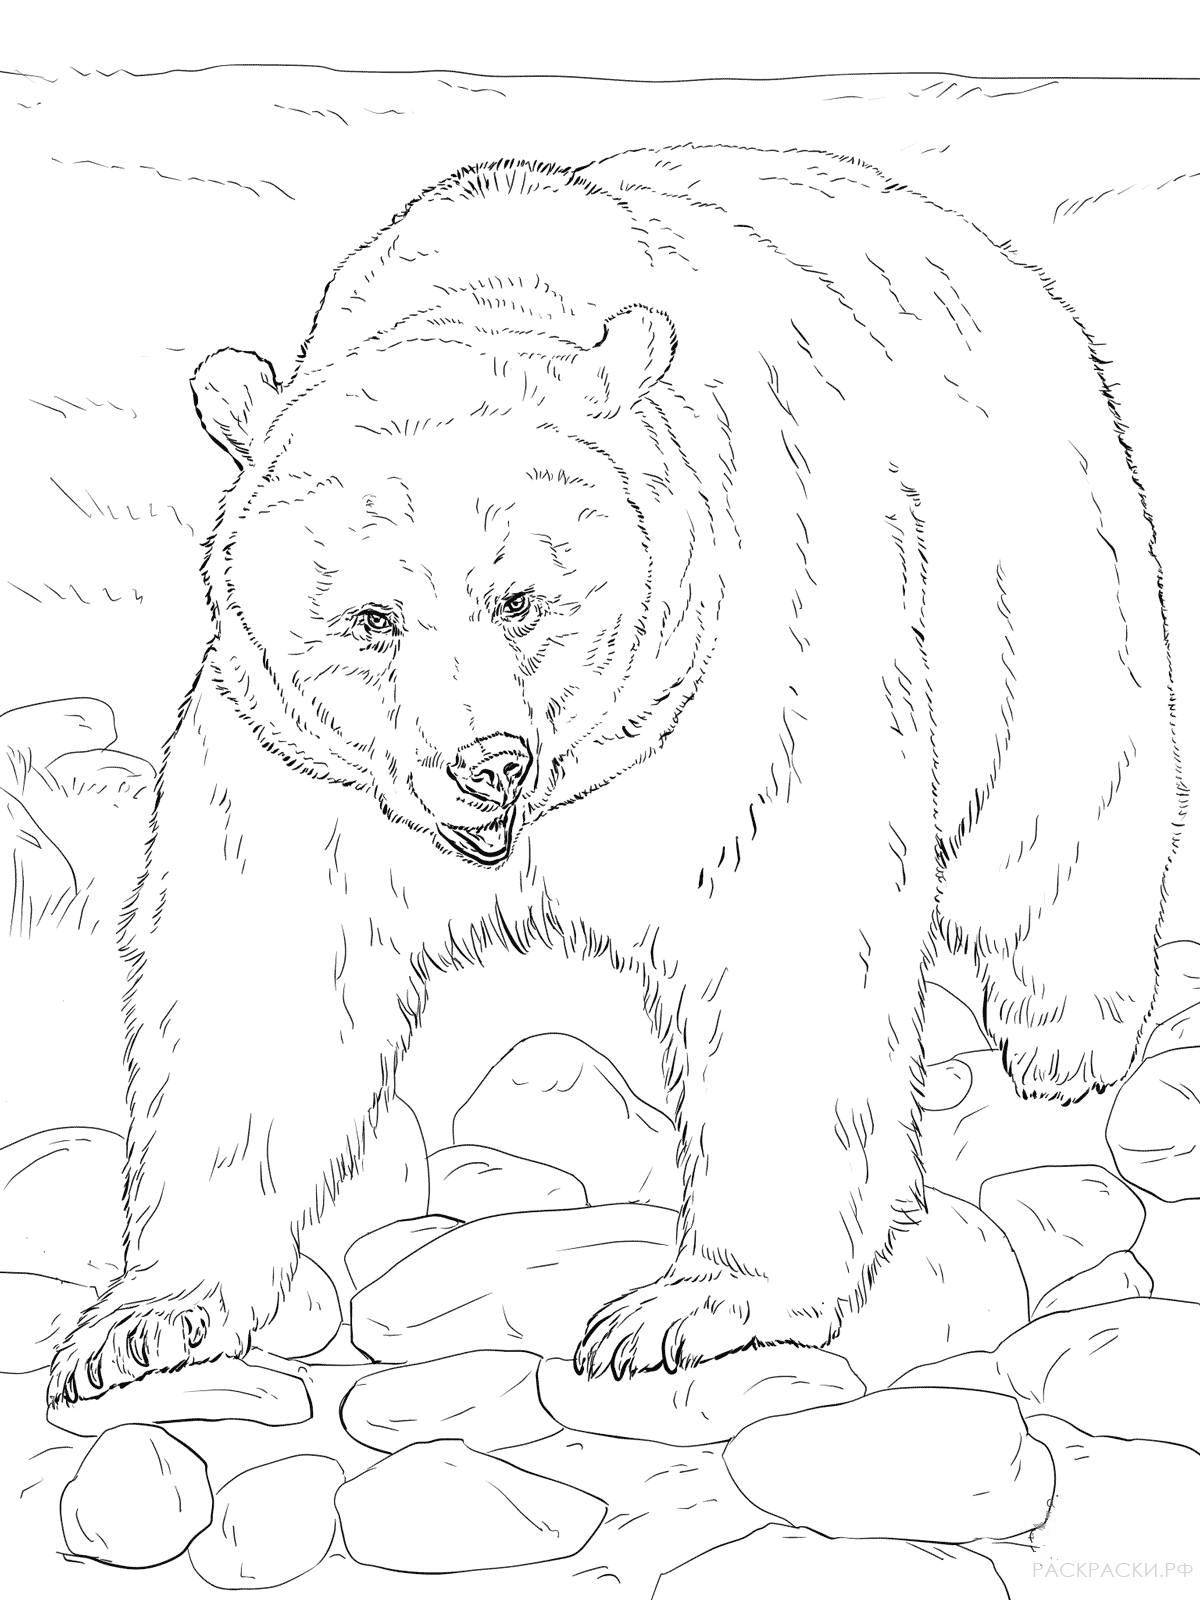 Delightful drawing of a bear